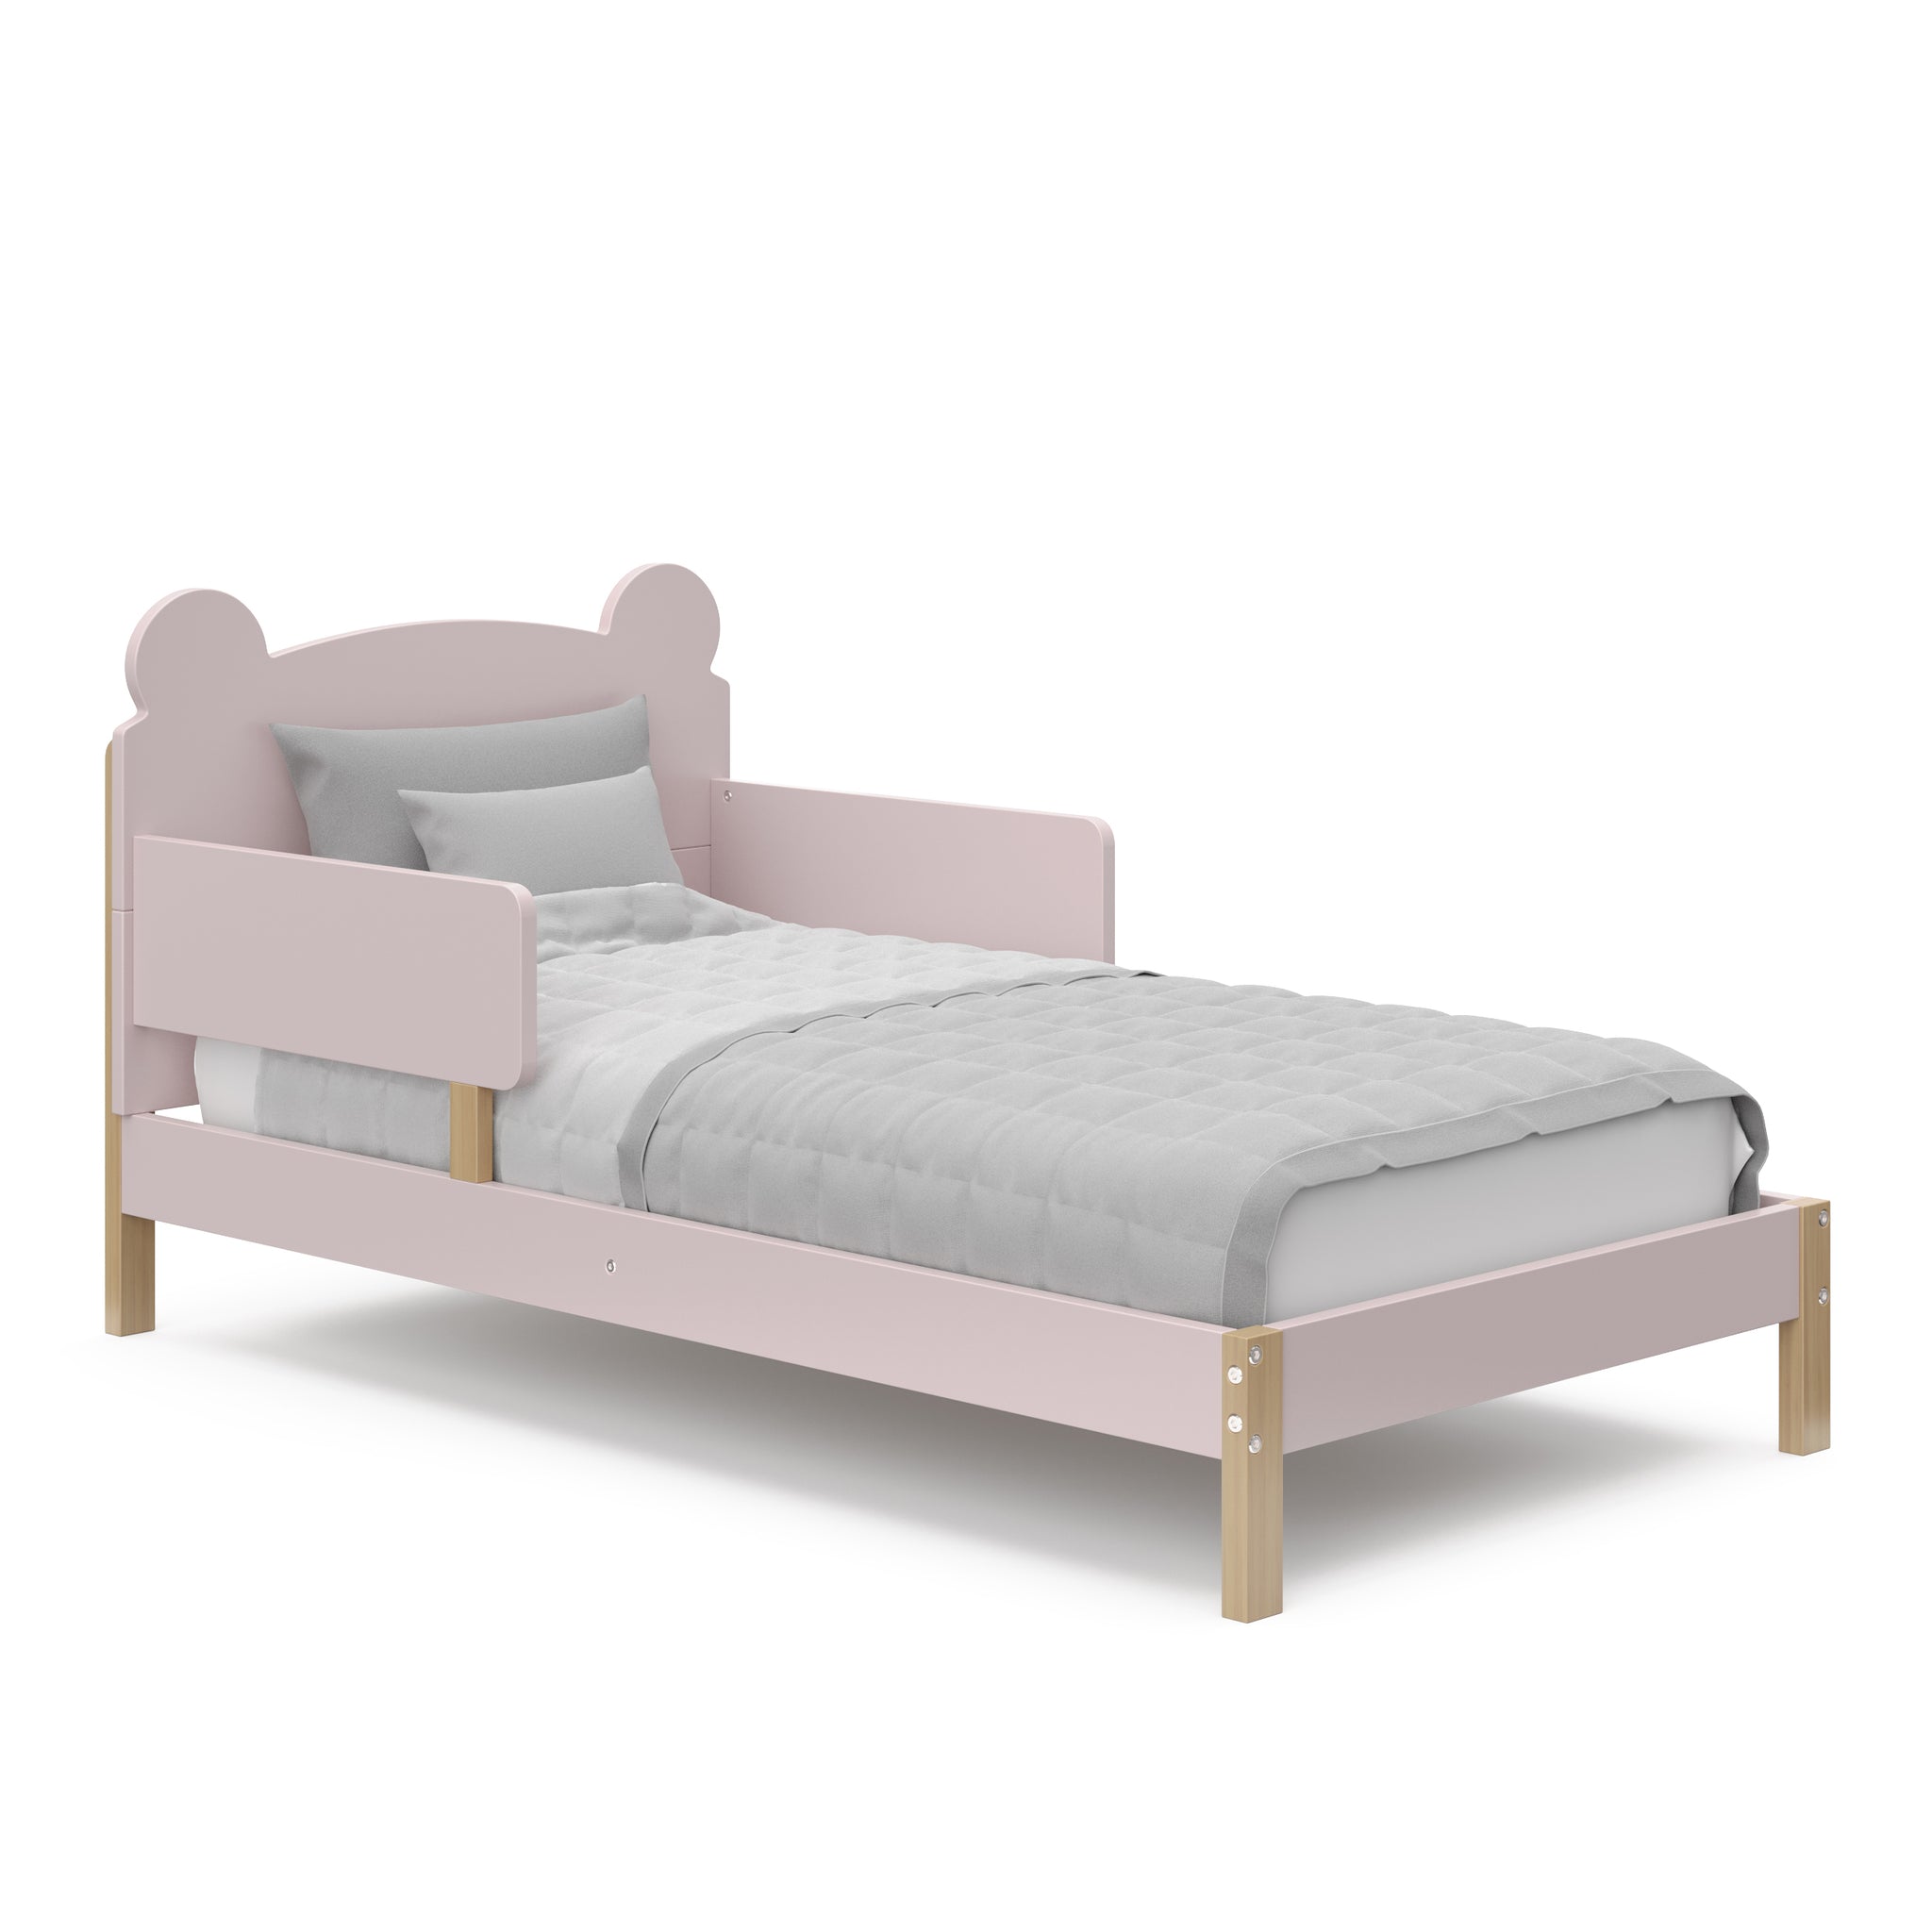 Angled view of a blush-colored toddler bed